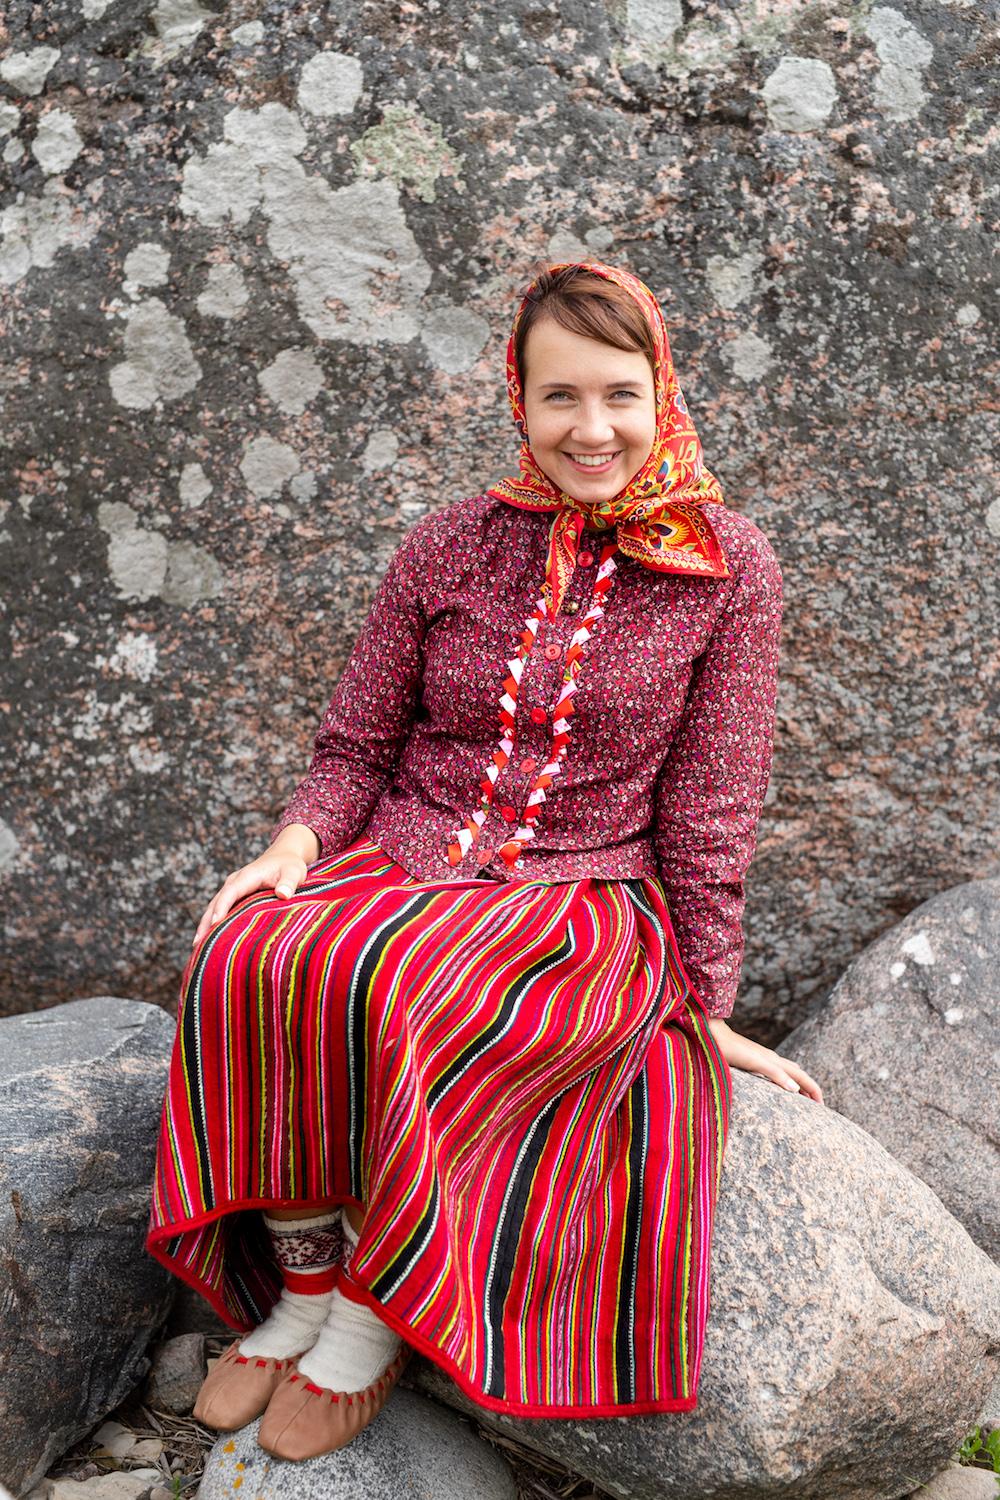 With men traditionally out at sea, Kihnu has developed into a matriarchal society. (Renee Altrov/Visit Estonia)